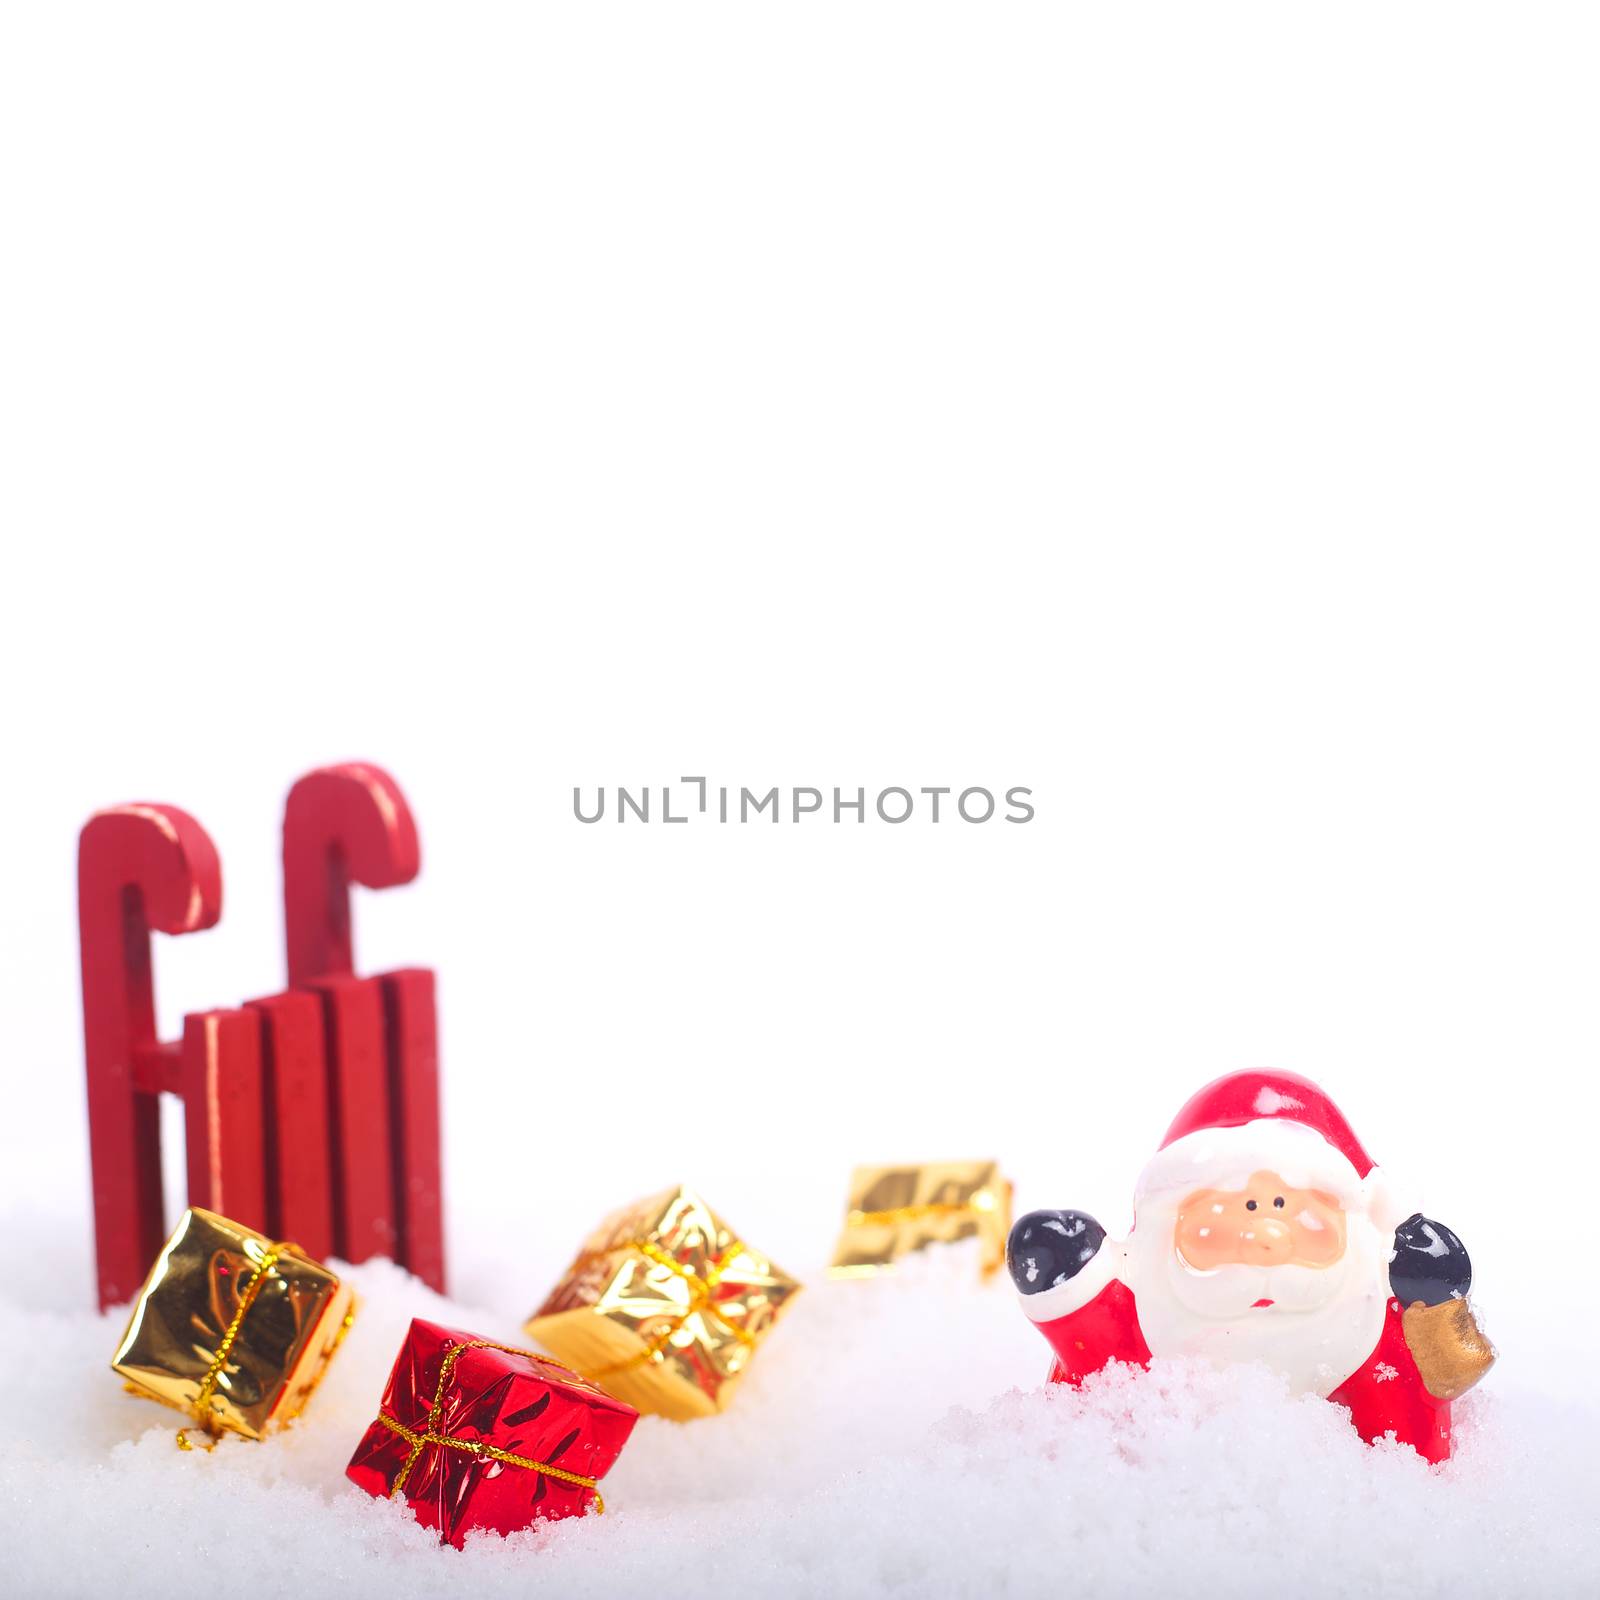 Santa Claus sledge accident in deep snow with gifts around